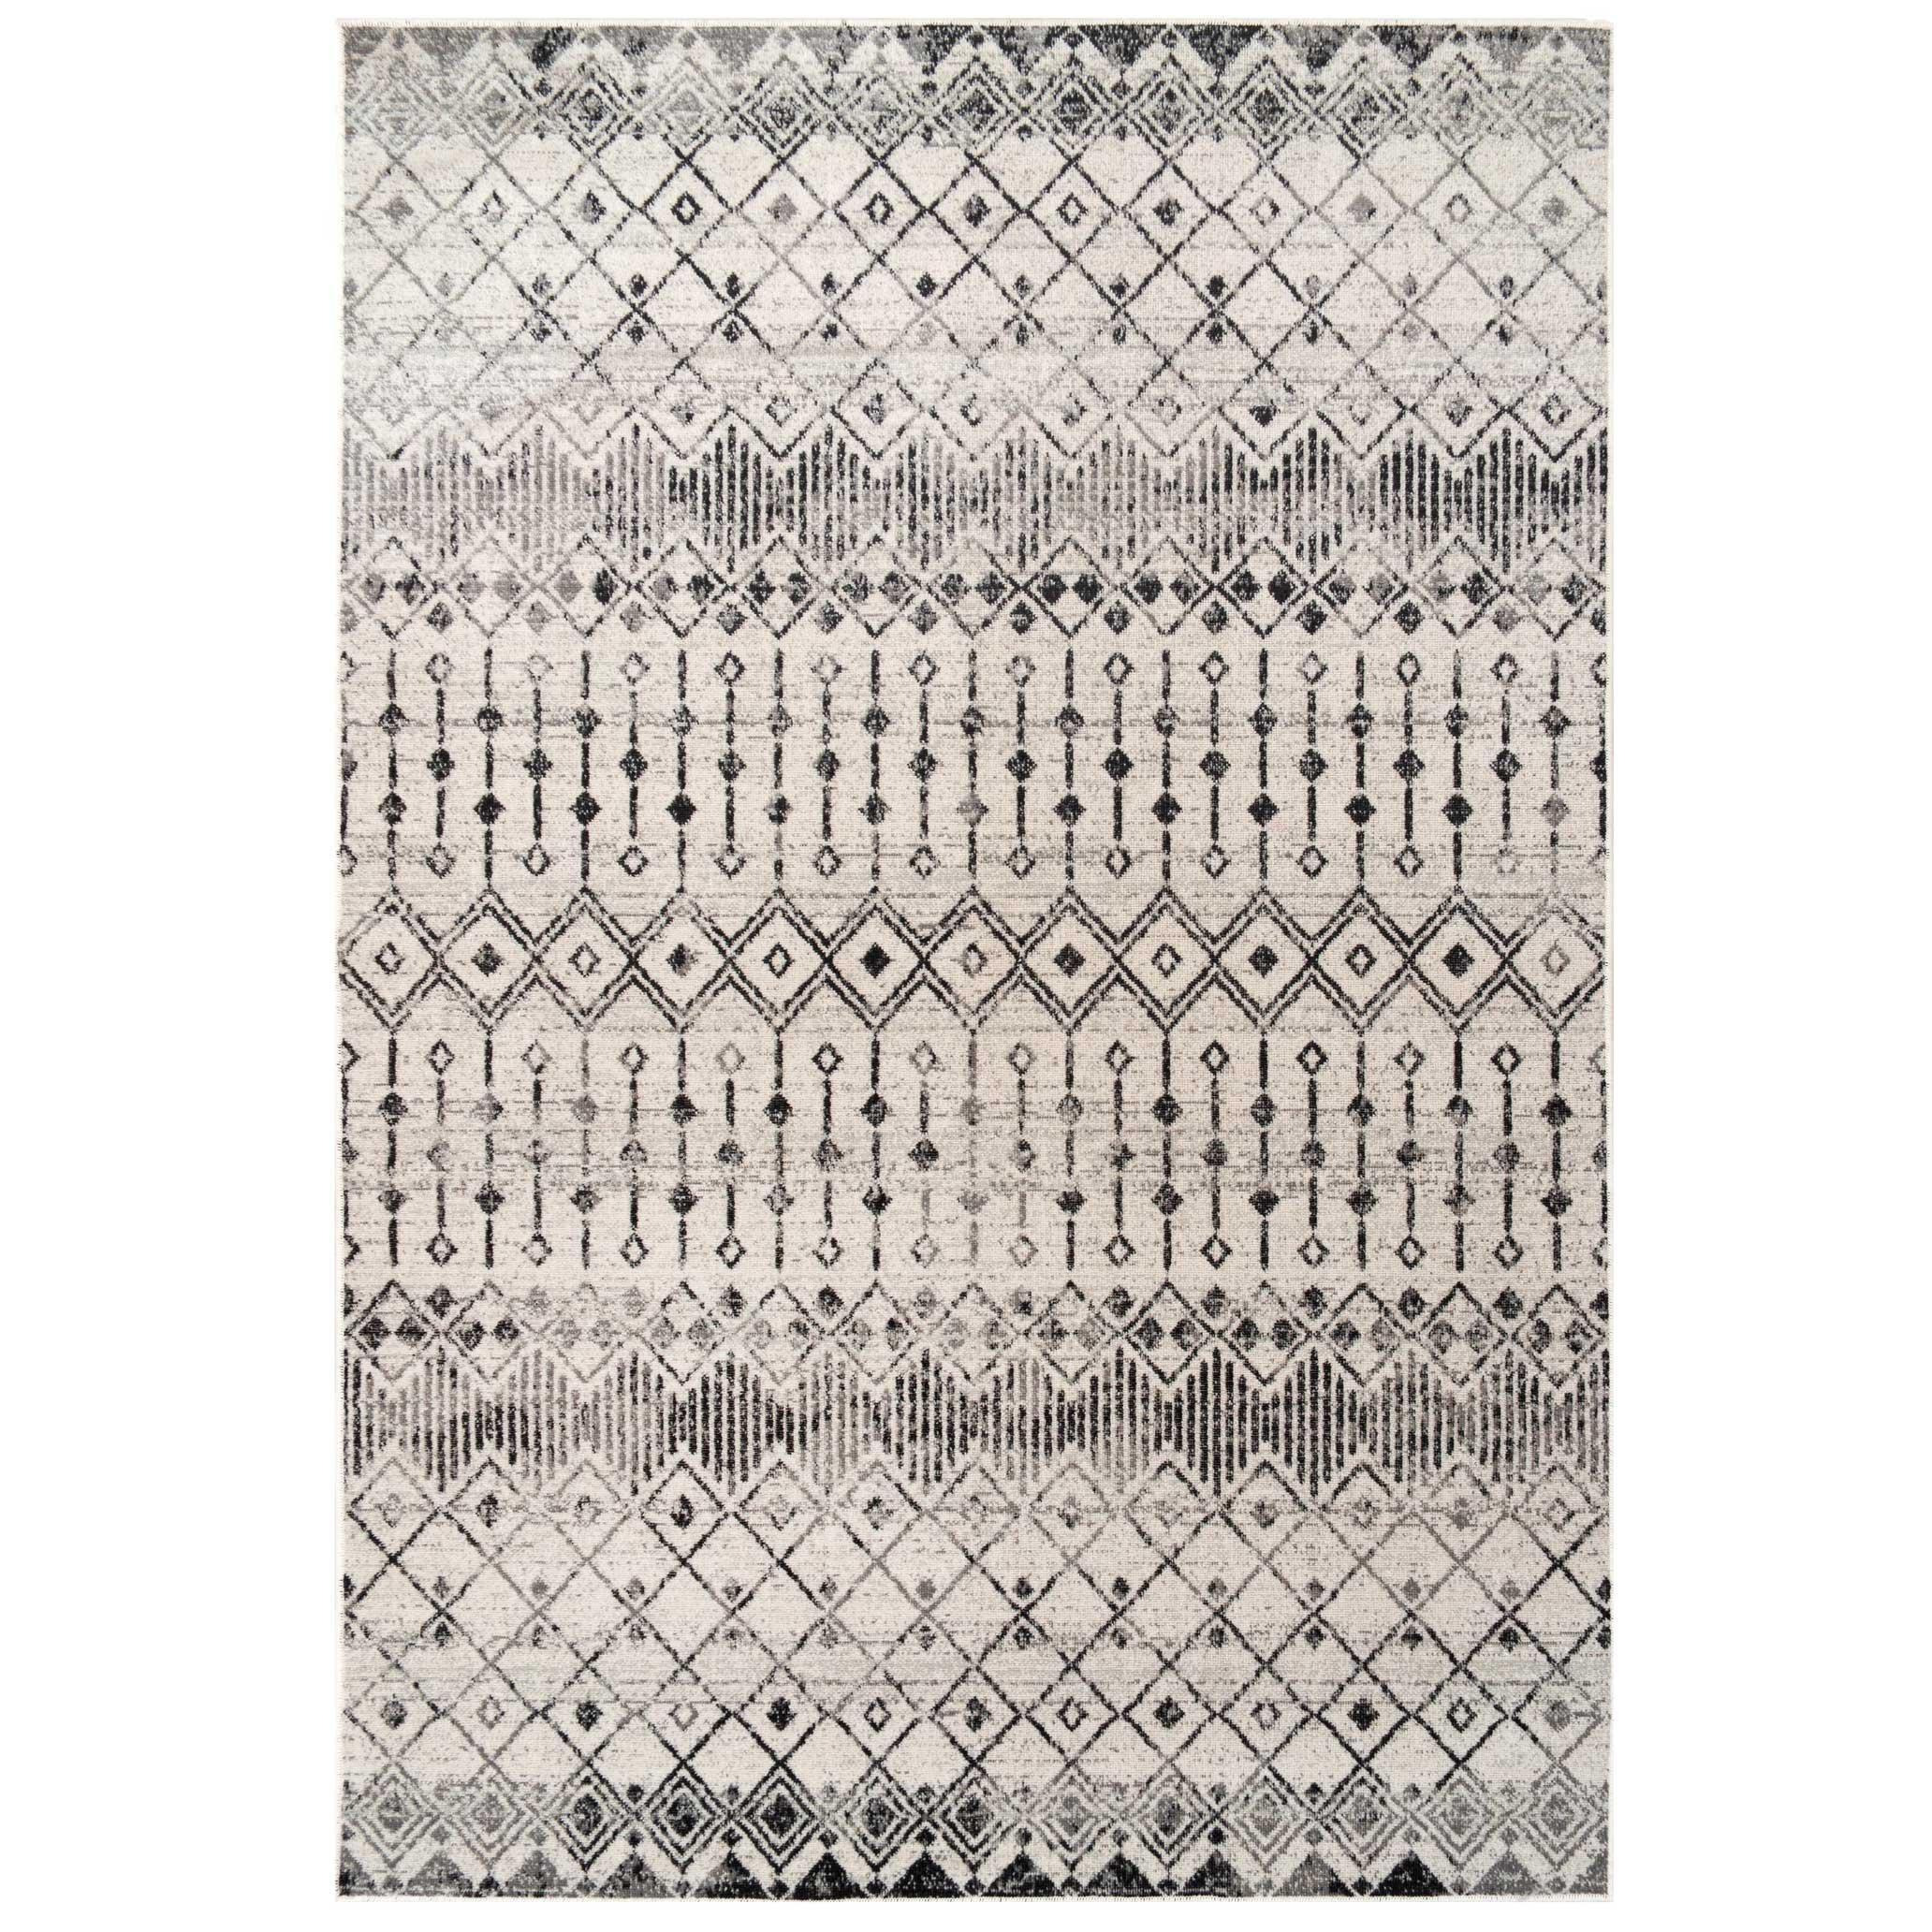 Grey Aztec Tribal Pattern Distressed Low Pile Area Rug - image 1